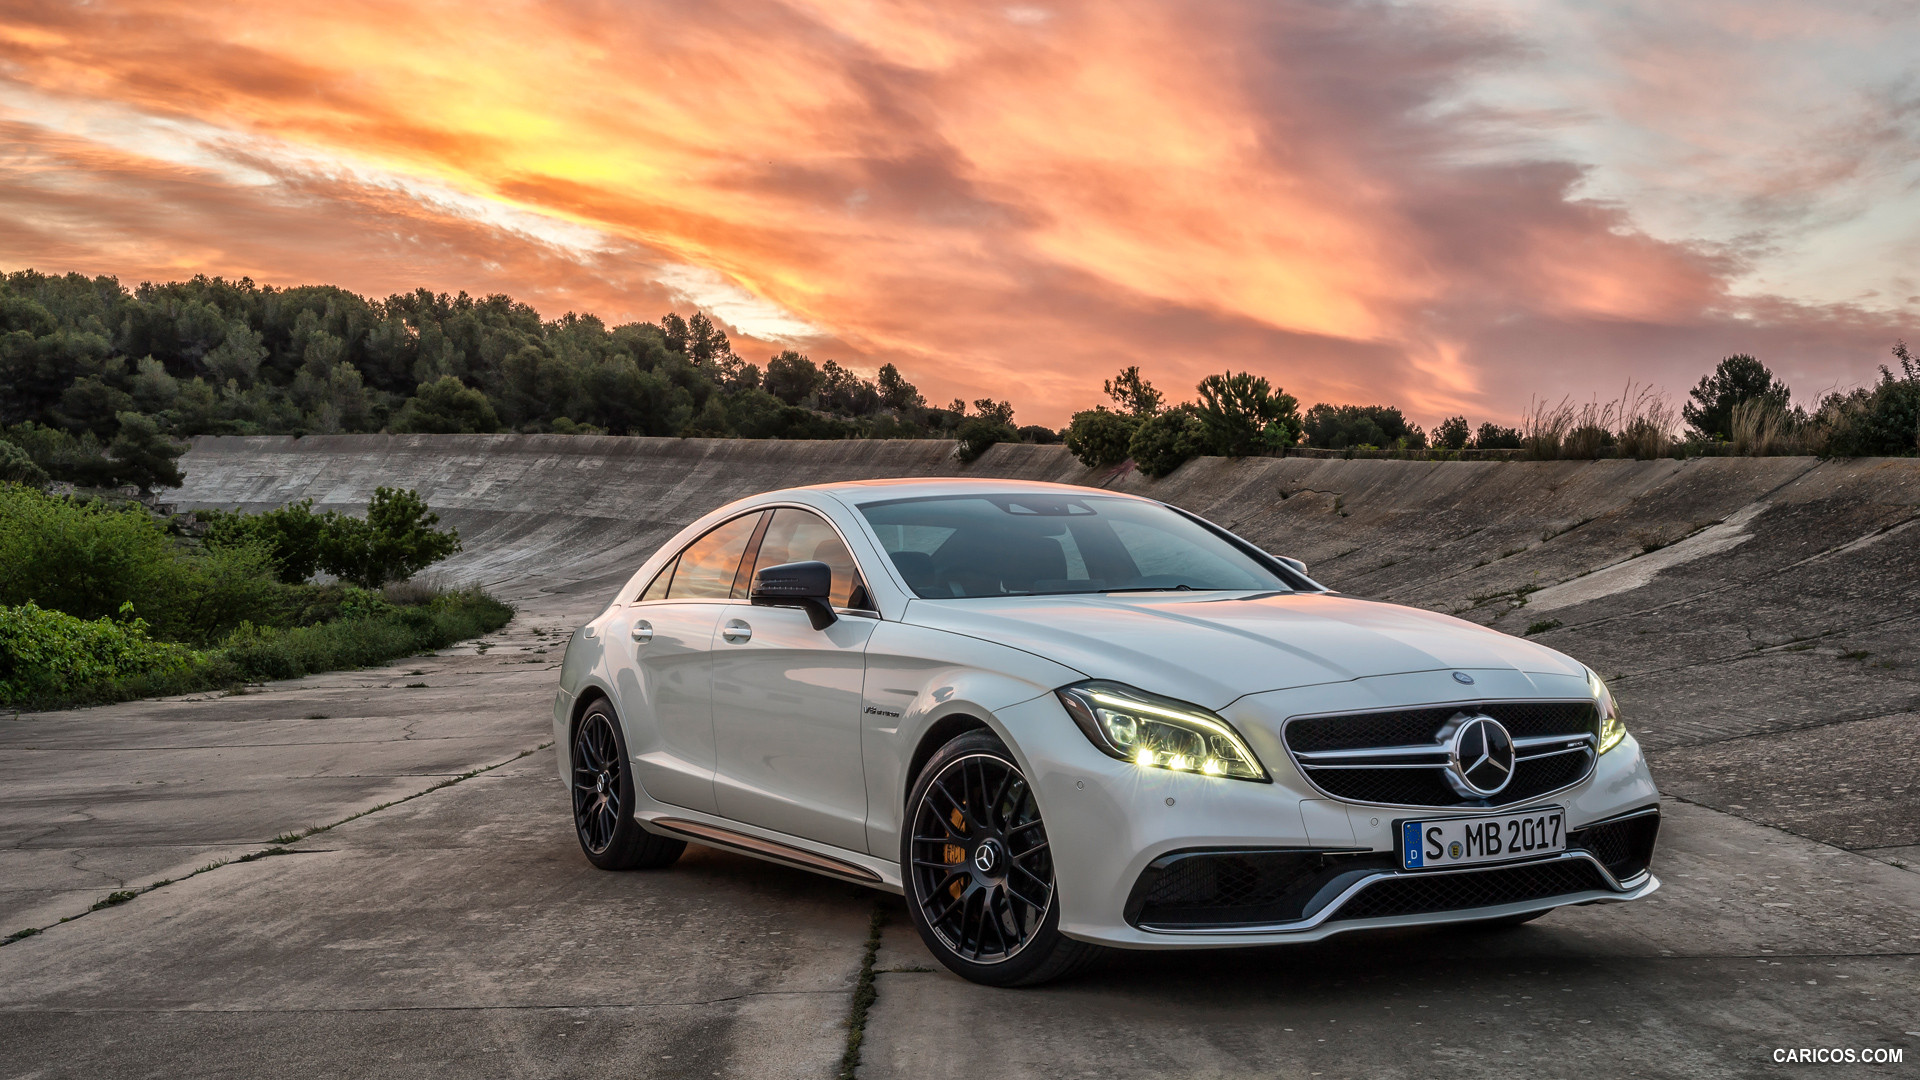 2015 Mercedes-Benz CLS 63 AMG S-Model - Front, #22 of 51